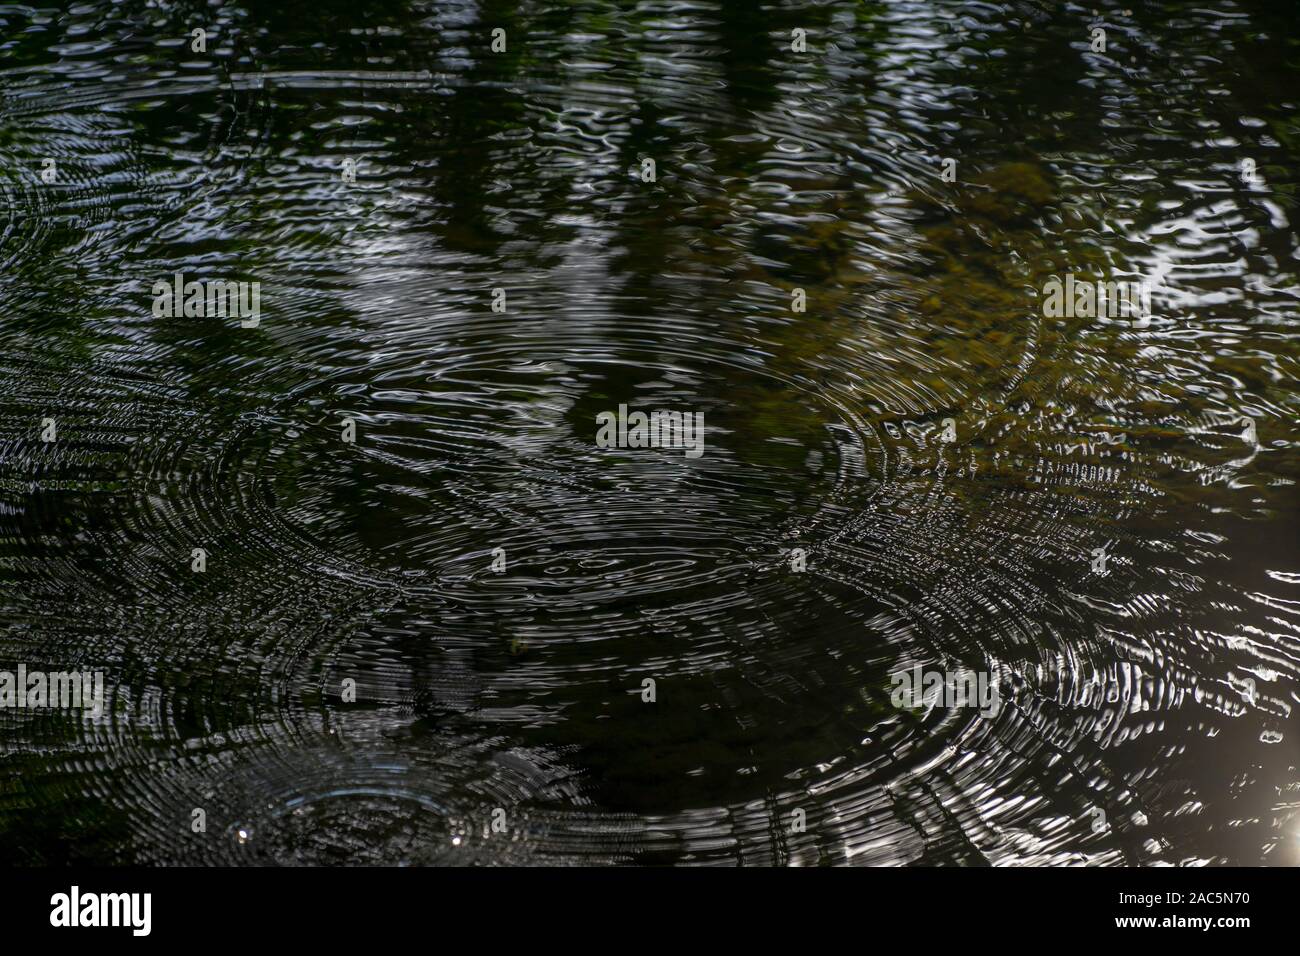 Reflections with rippling circles in the ponds at Carlsmith Beach Park in Hilo, Big Island of Hawai'i. Stock Photo